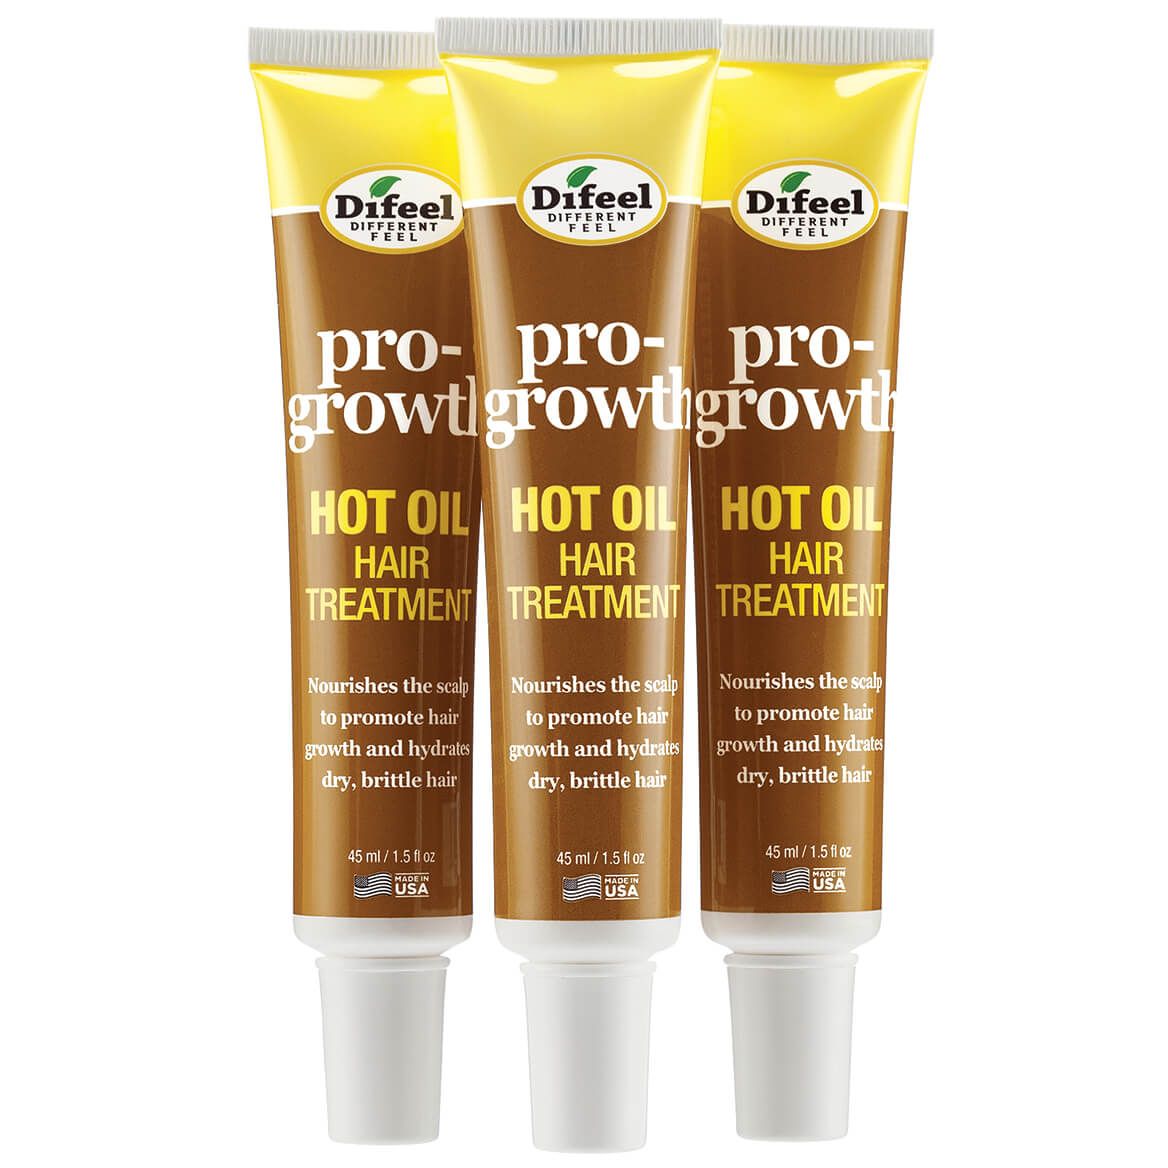 Pro-Growth Hot Oil Hair Treatment, Set of 3 + '-' + 376124